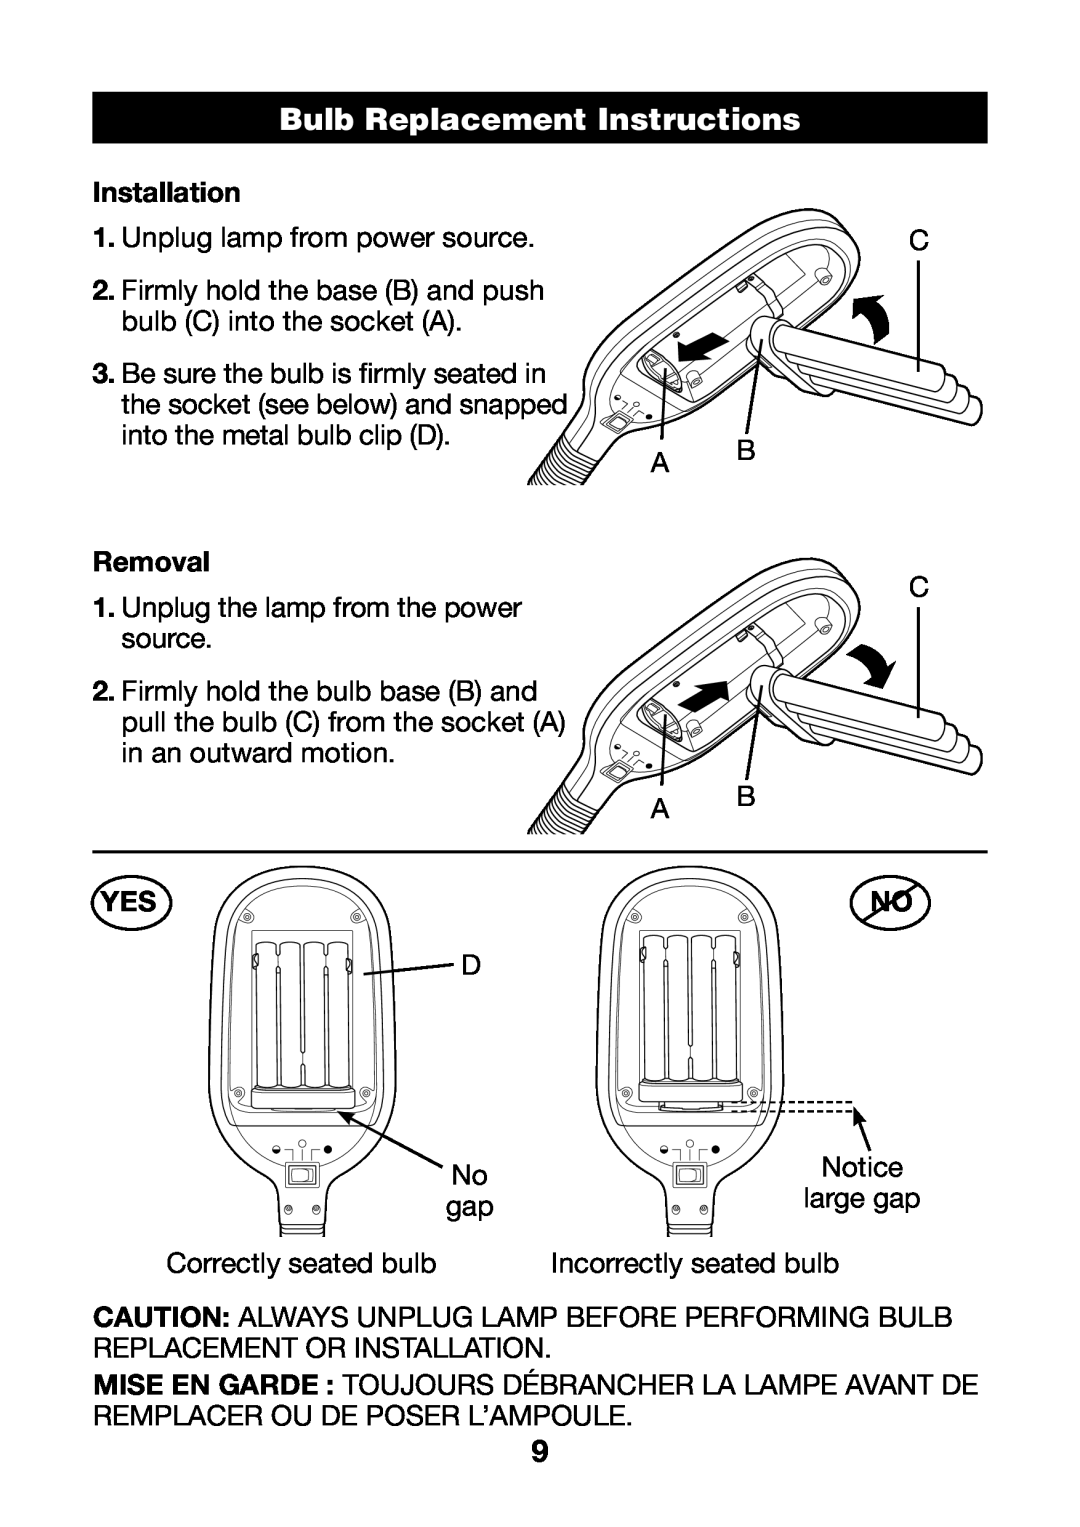 Verilux PL04 manual Bulb ReplacementHEADERInstructions, Installation, Removal 